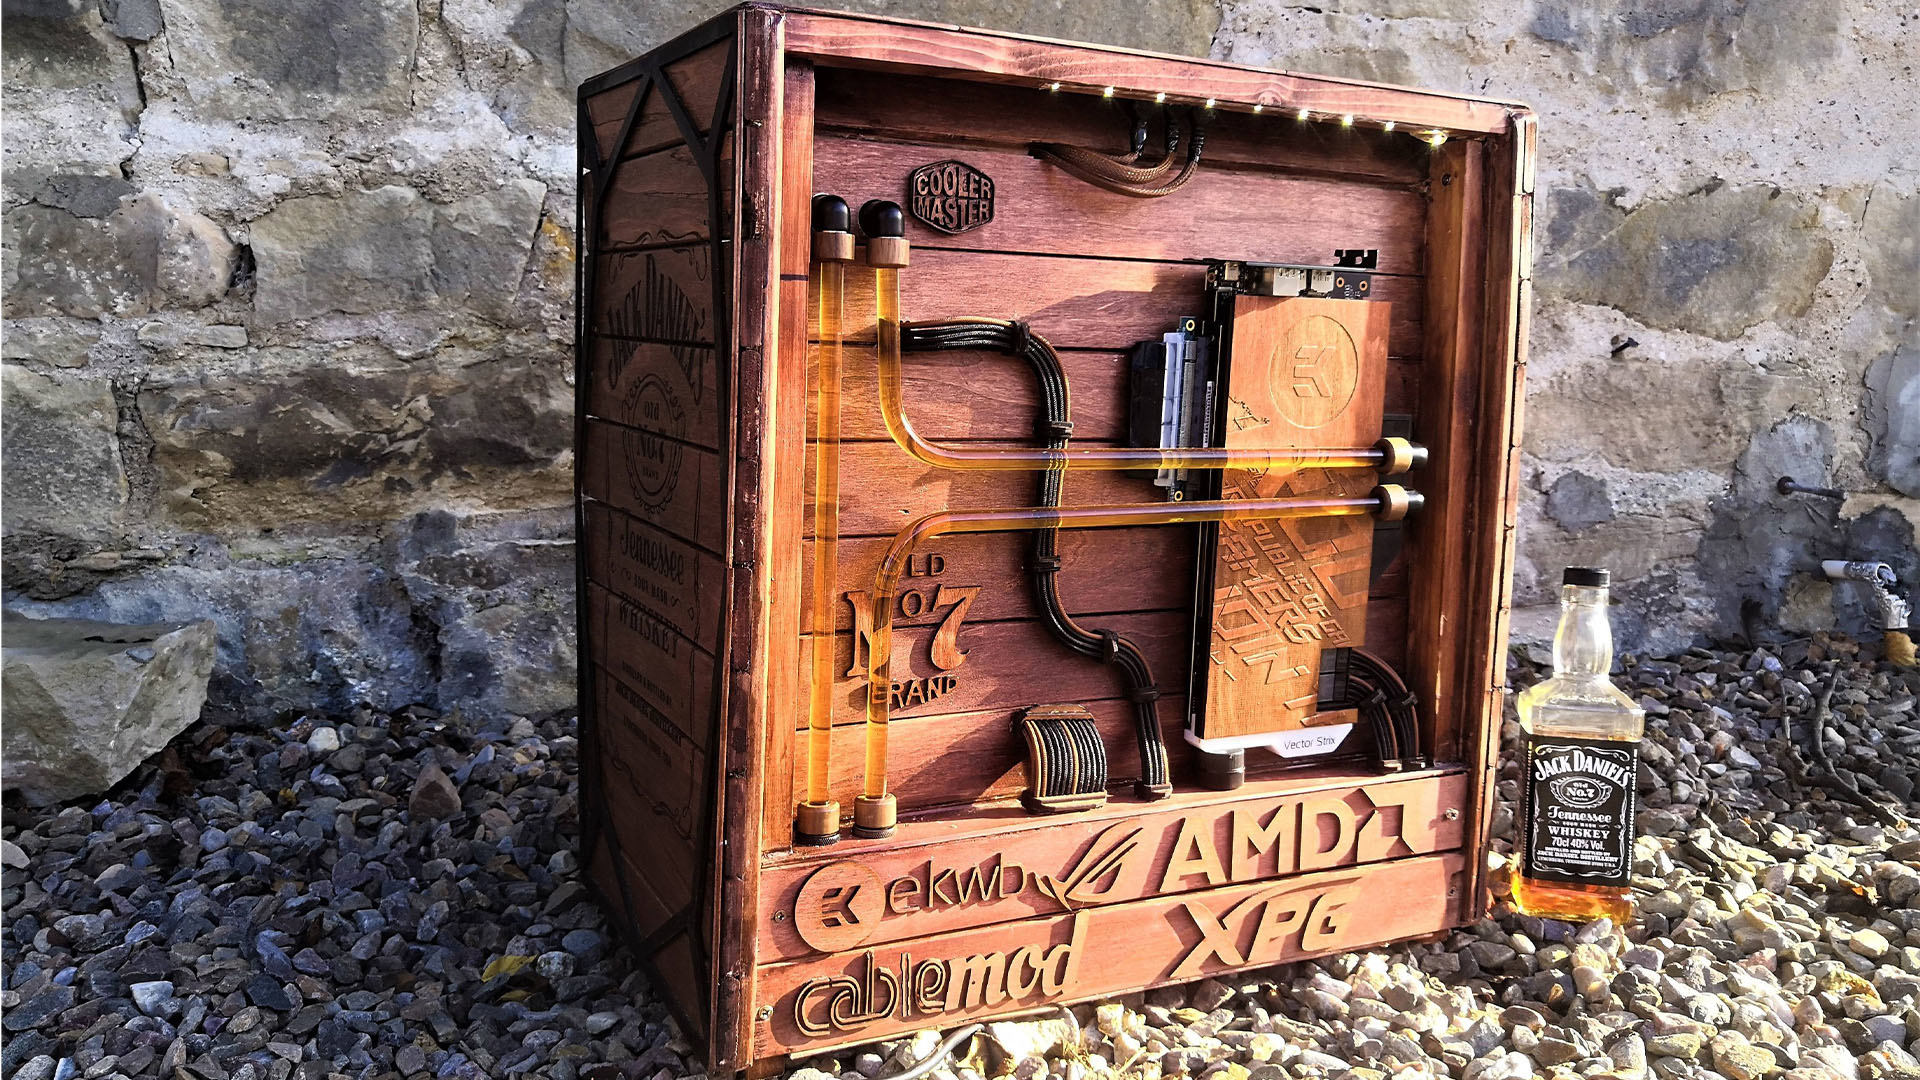 The back of the Jack Daniel's gaming PC, which is wooden, and has whiskey-colored liquid coolant